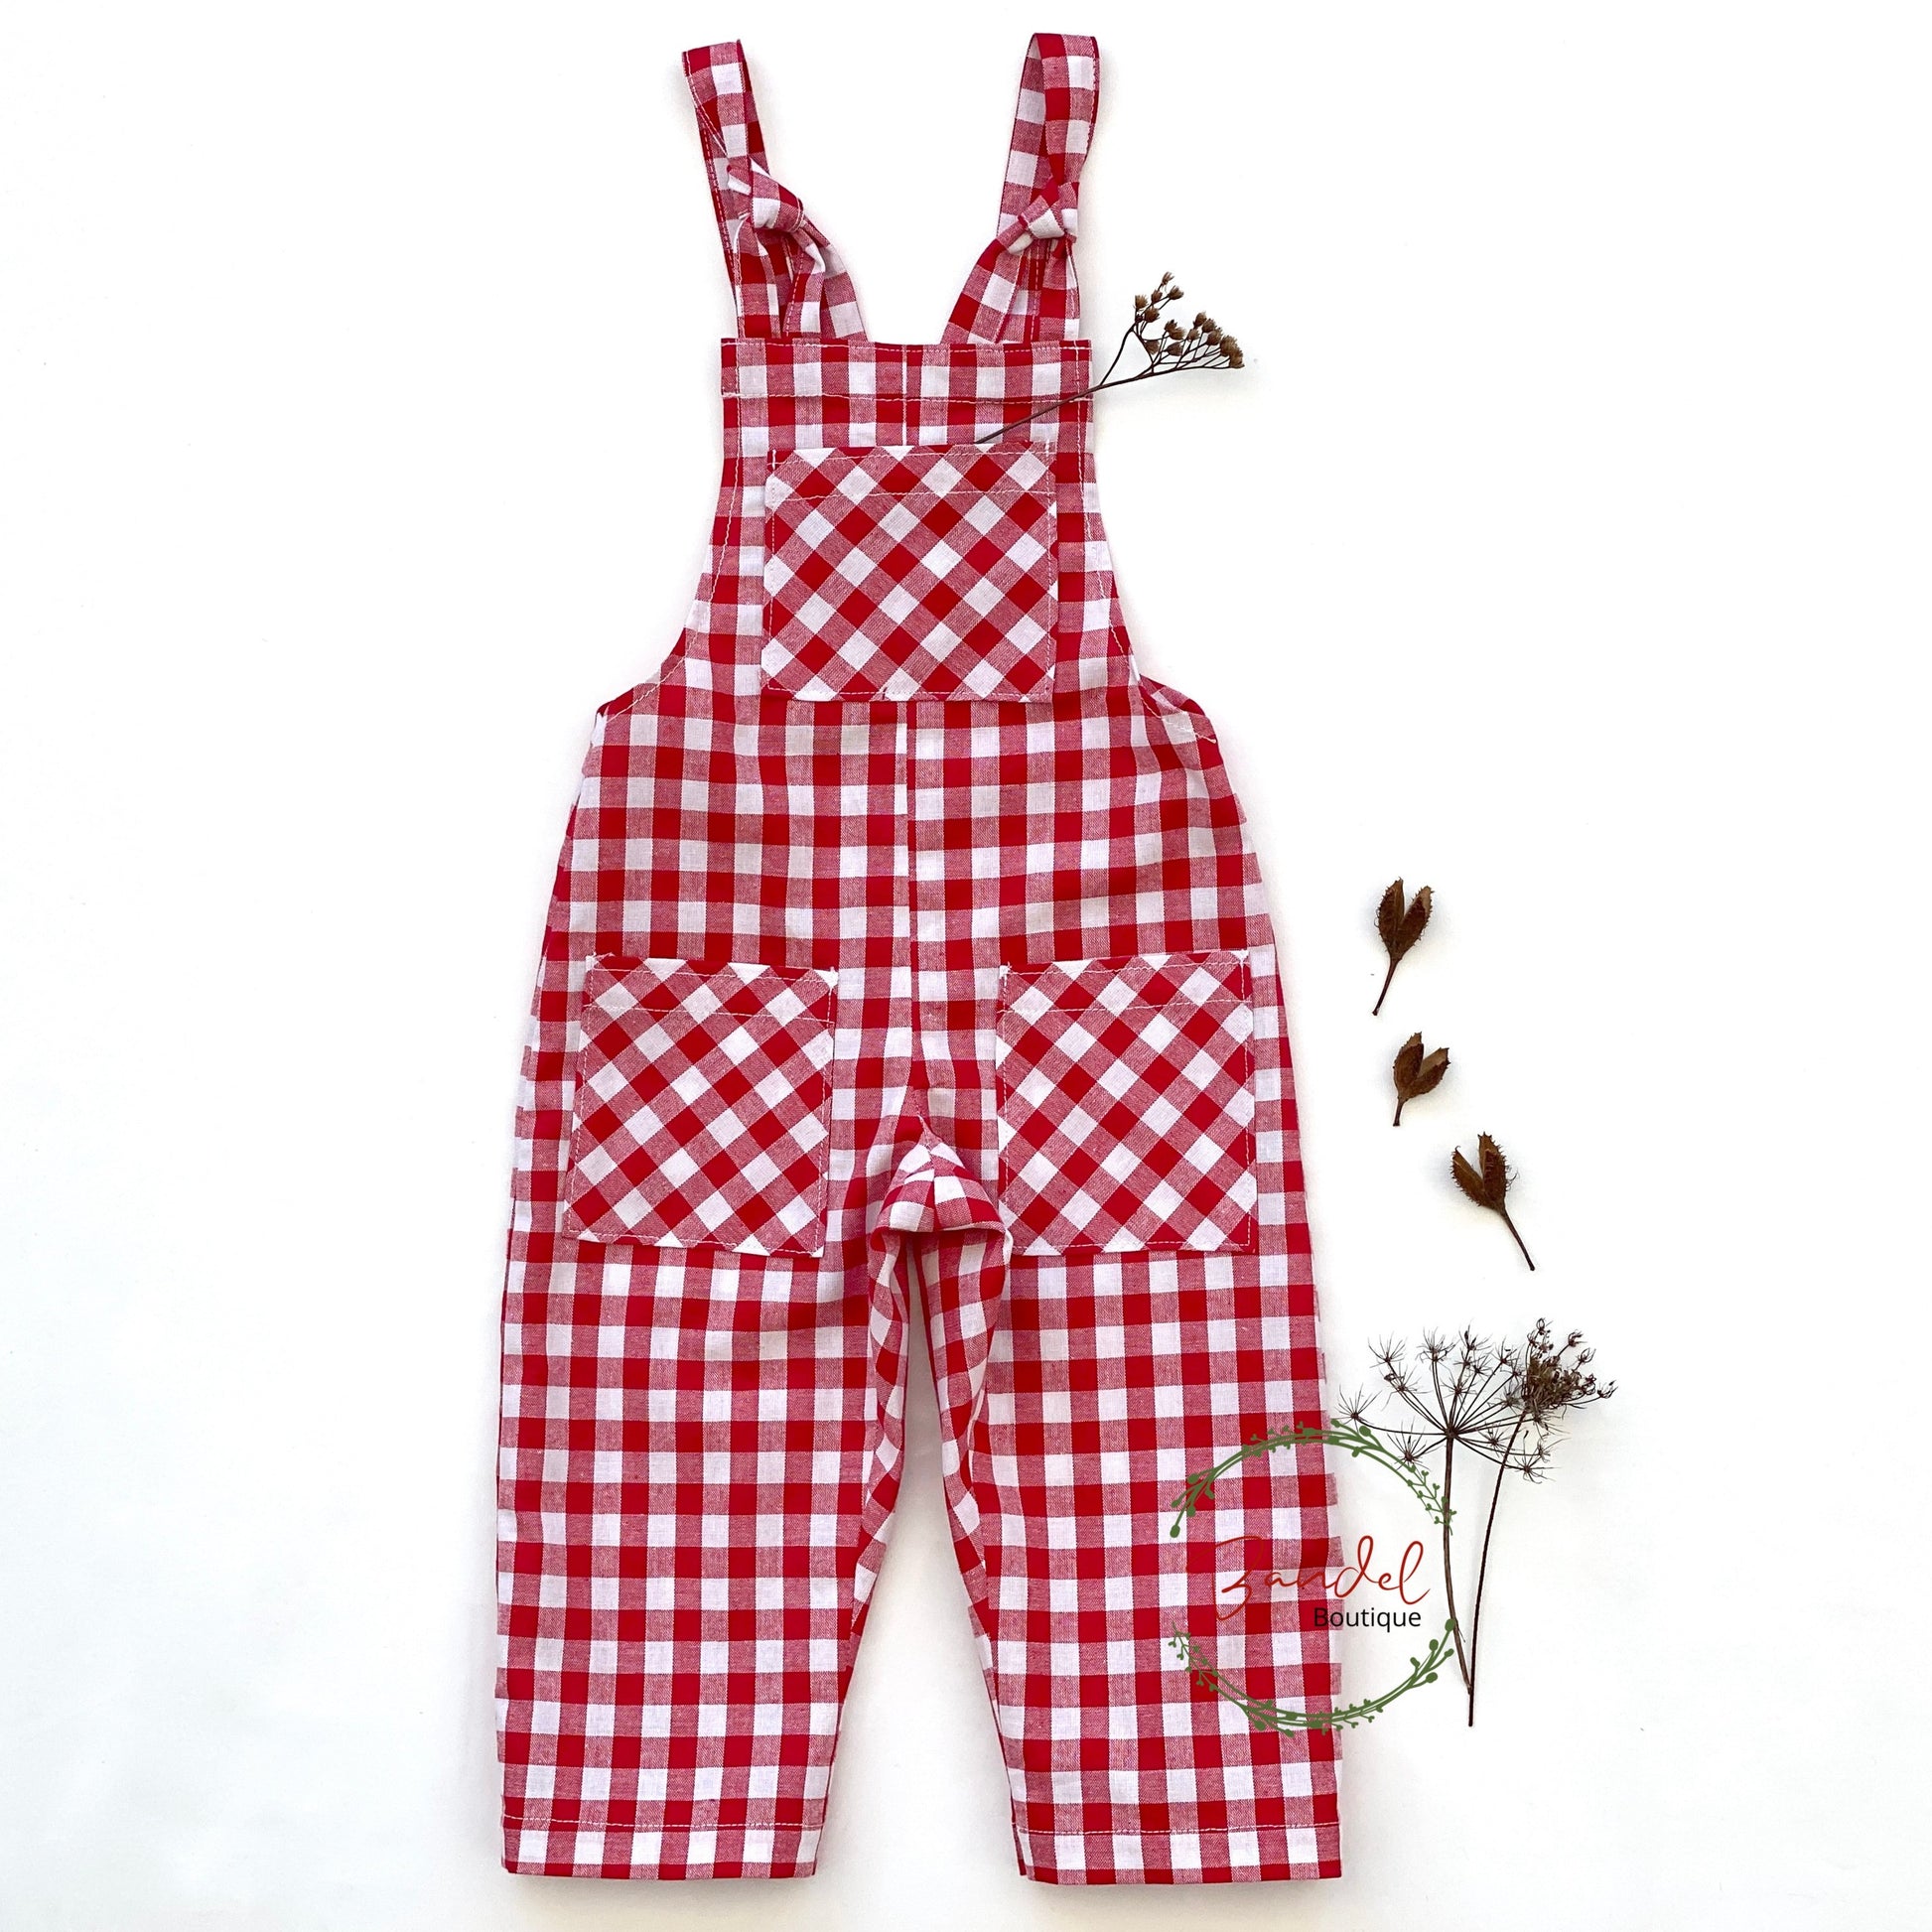 A timeless classic in the form of these Check Cotton Dungarees, crafted from comfortable red check cotton. A relaxed fit design with adjustable tie straps and 3 front pockets, allowing your little one to store small treasures with ease. Perfect for your little one's adventures. A sophisticated yet effortless piece, perfect for days spent outdoors.